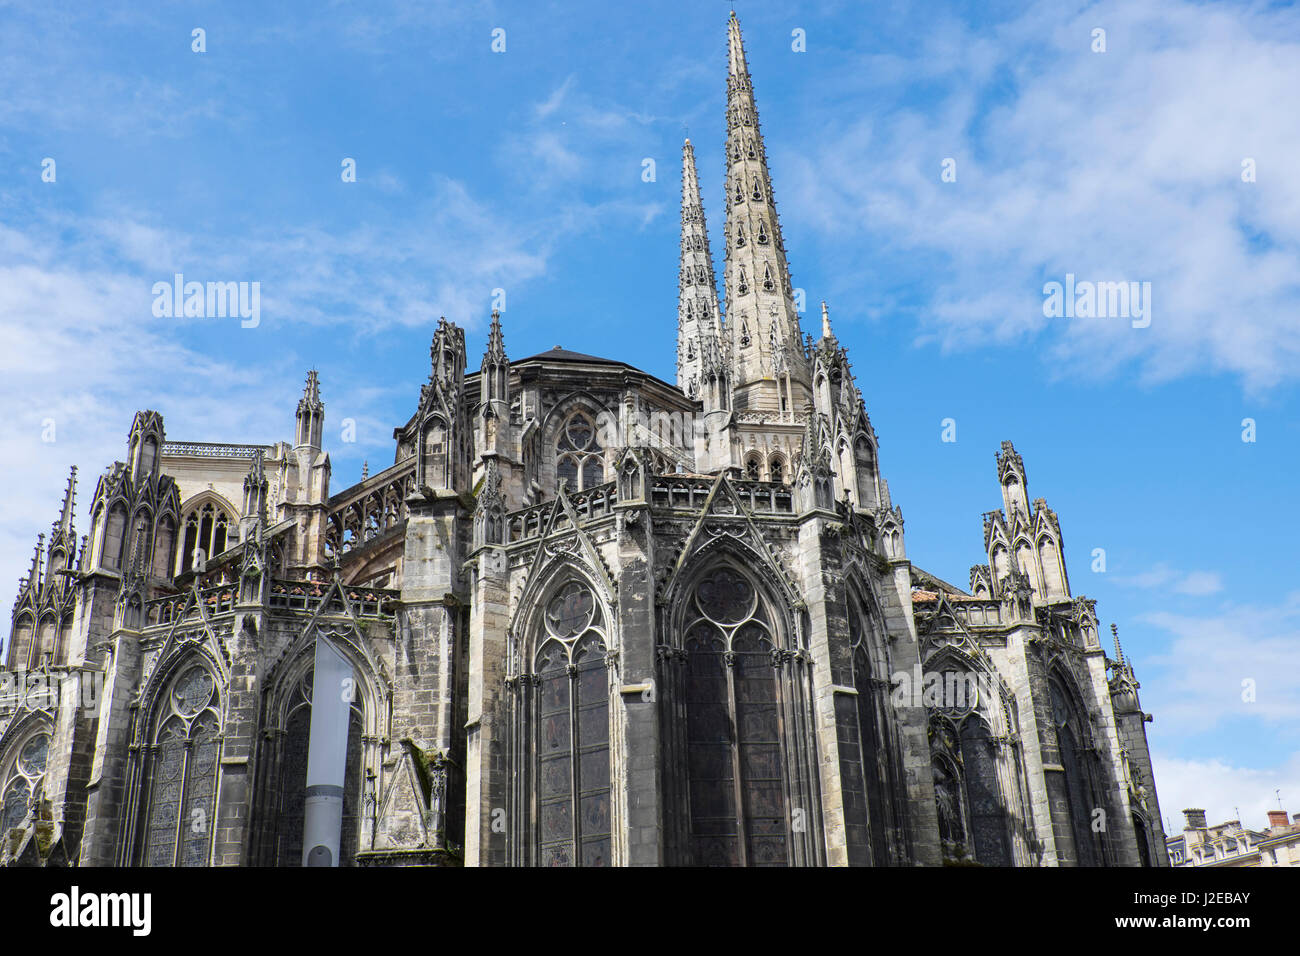 France, exterior of Bordeaux Cathedral or Cathedrale Saint-Andre de Bordeaux.  The cathedral was consecrated by Pope Urban II in 1096. The Royal Gate is  early 13th century, while other construction is from